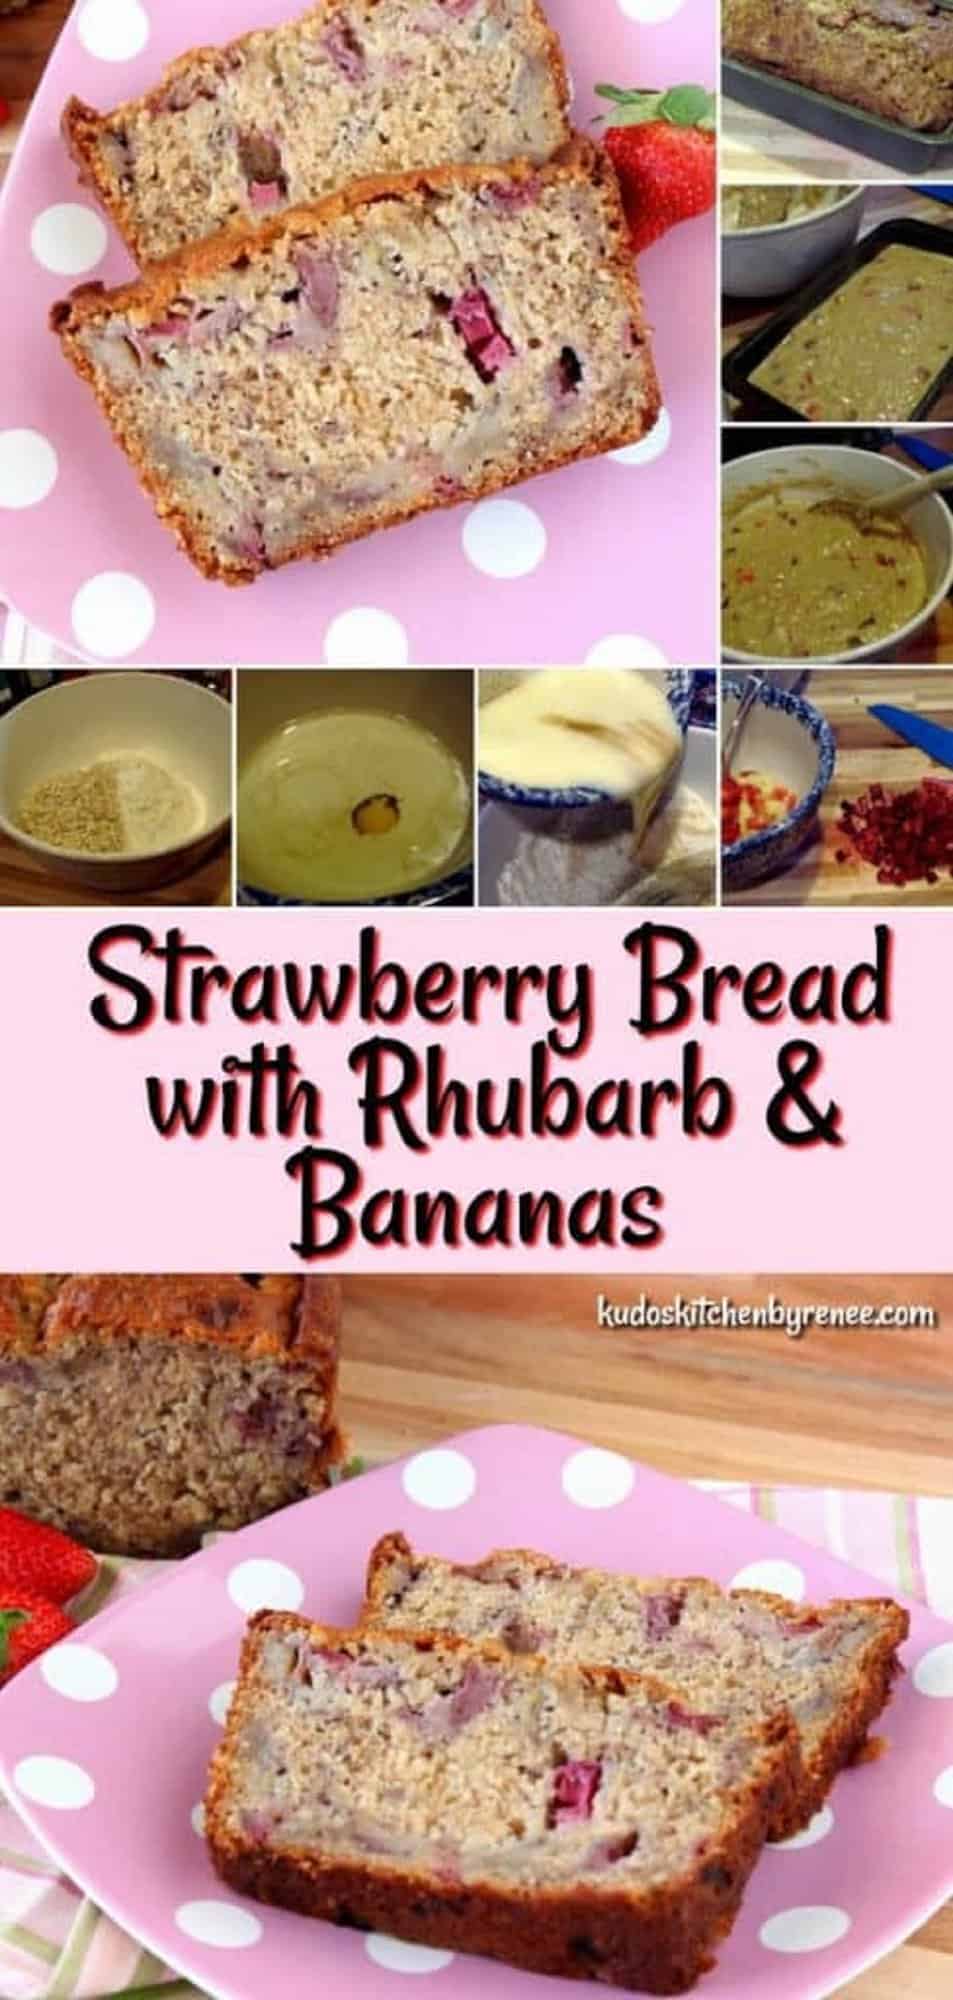 A collage of how to make Strawberry Rhubarb Bread with Bananas.